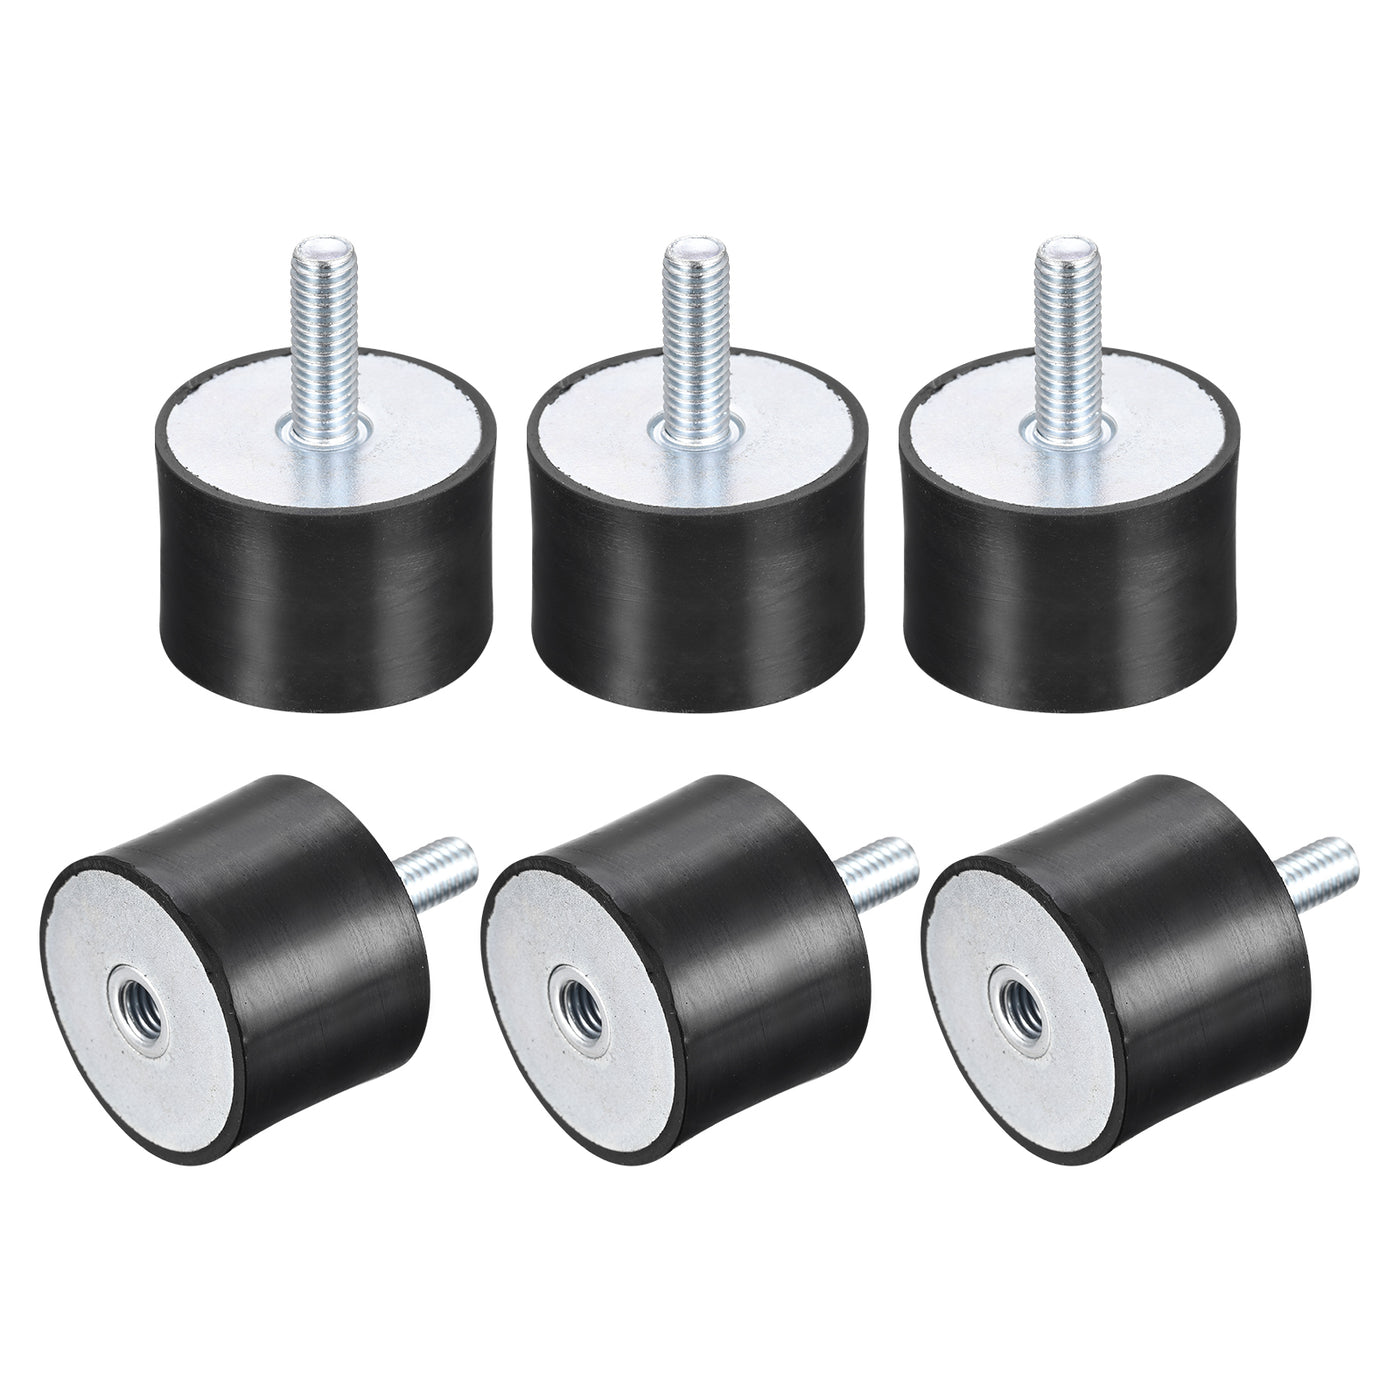 uxcell Uxcell Rubber Mounts 6pcs M8 Male/Female Vibration Isolator Shock Absorber D40mmxH30mm